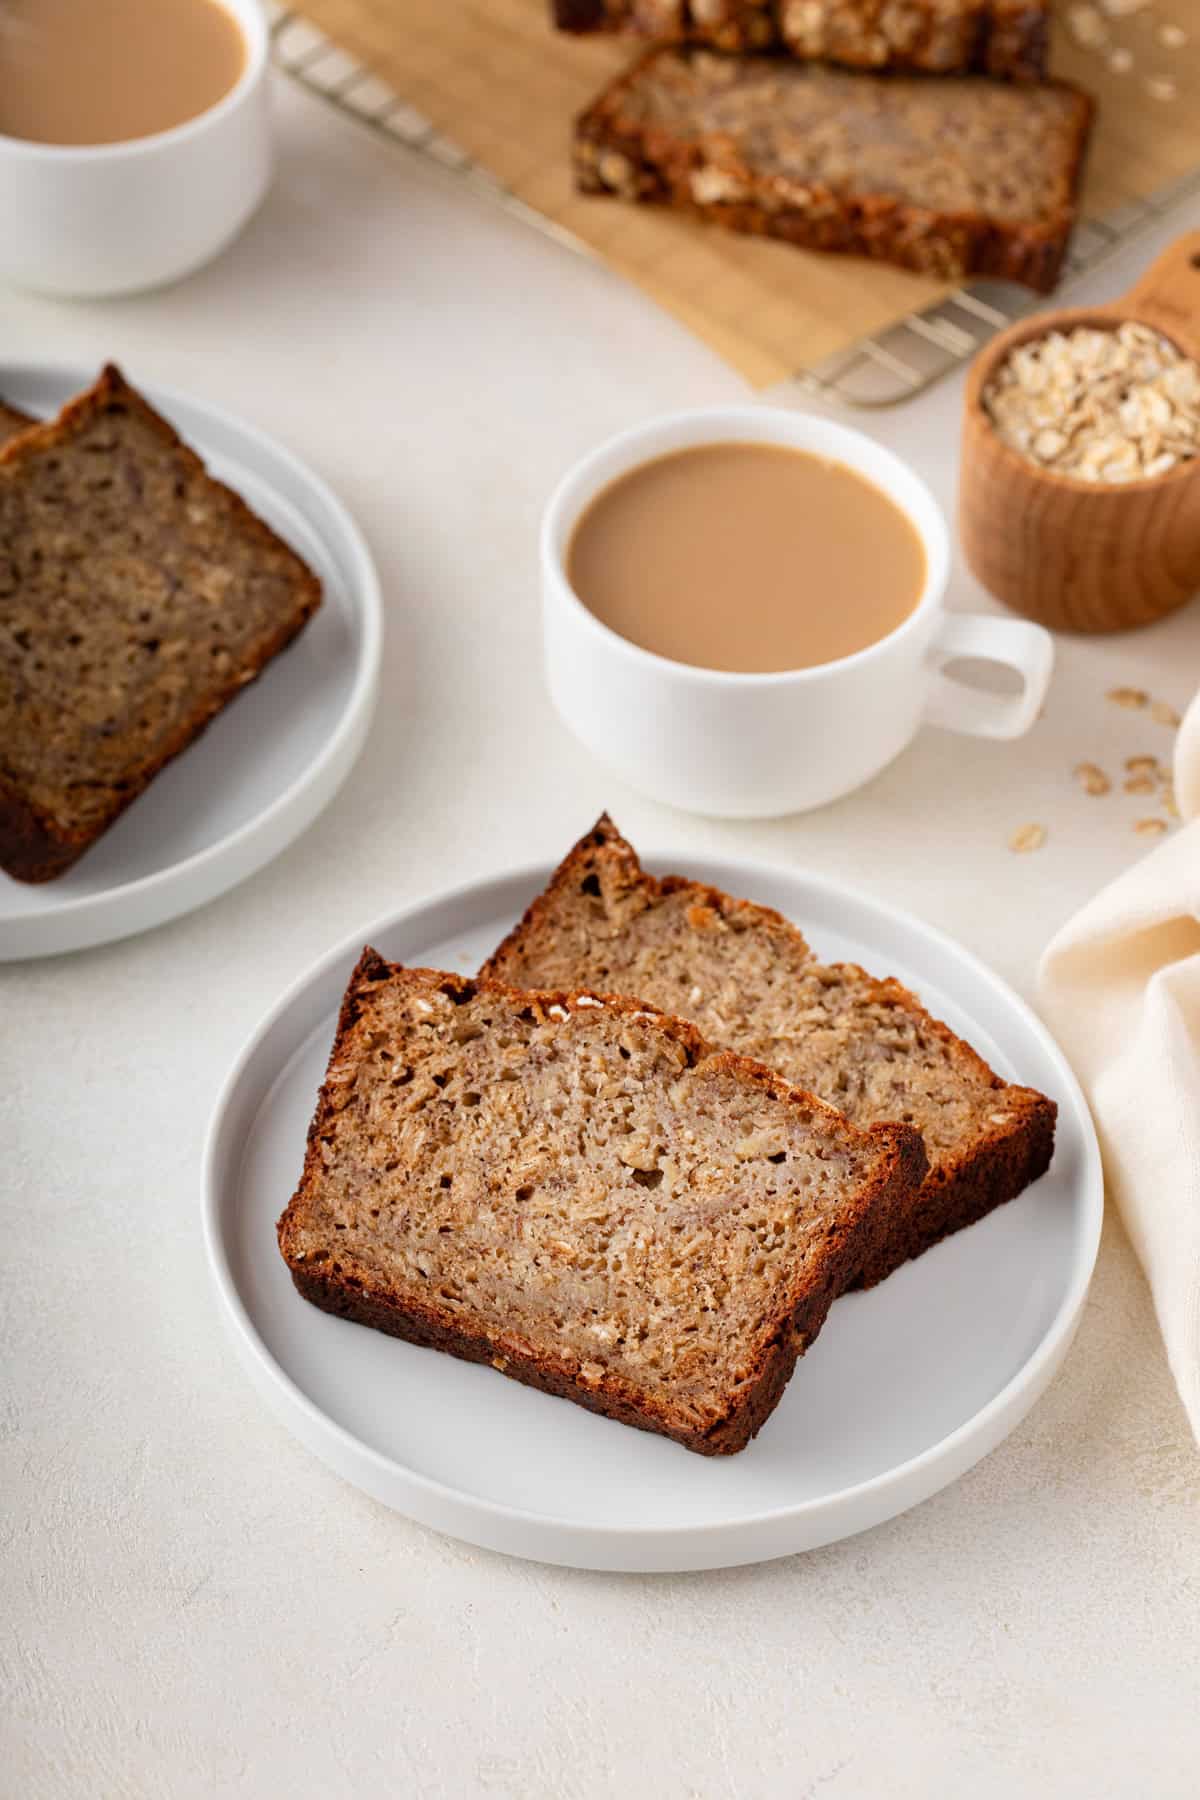 Two plates, each with slices of oatmeal banana bread, next to a cup of coffee.